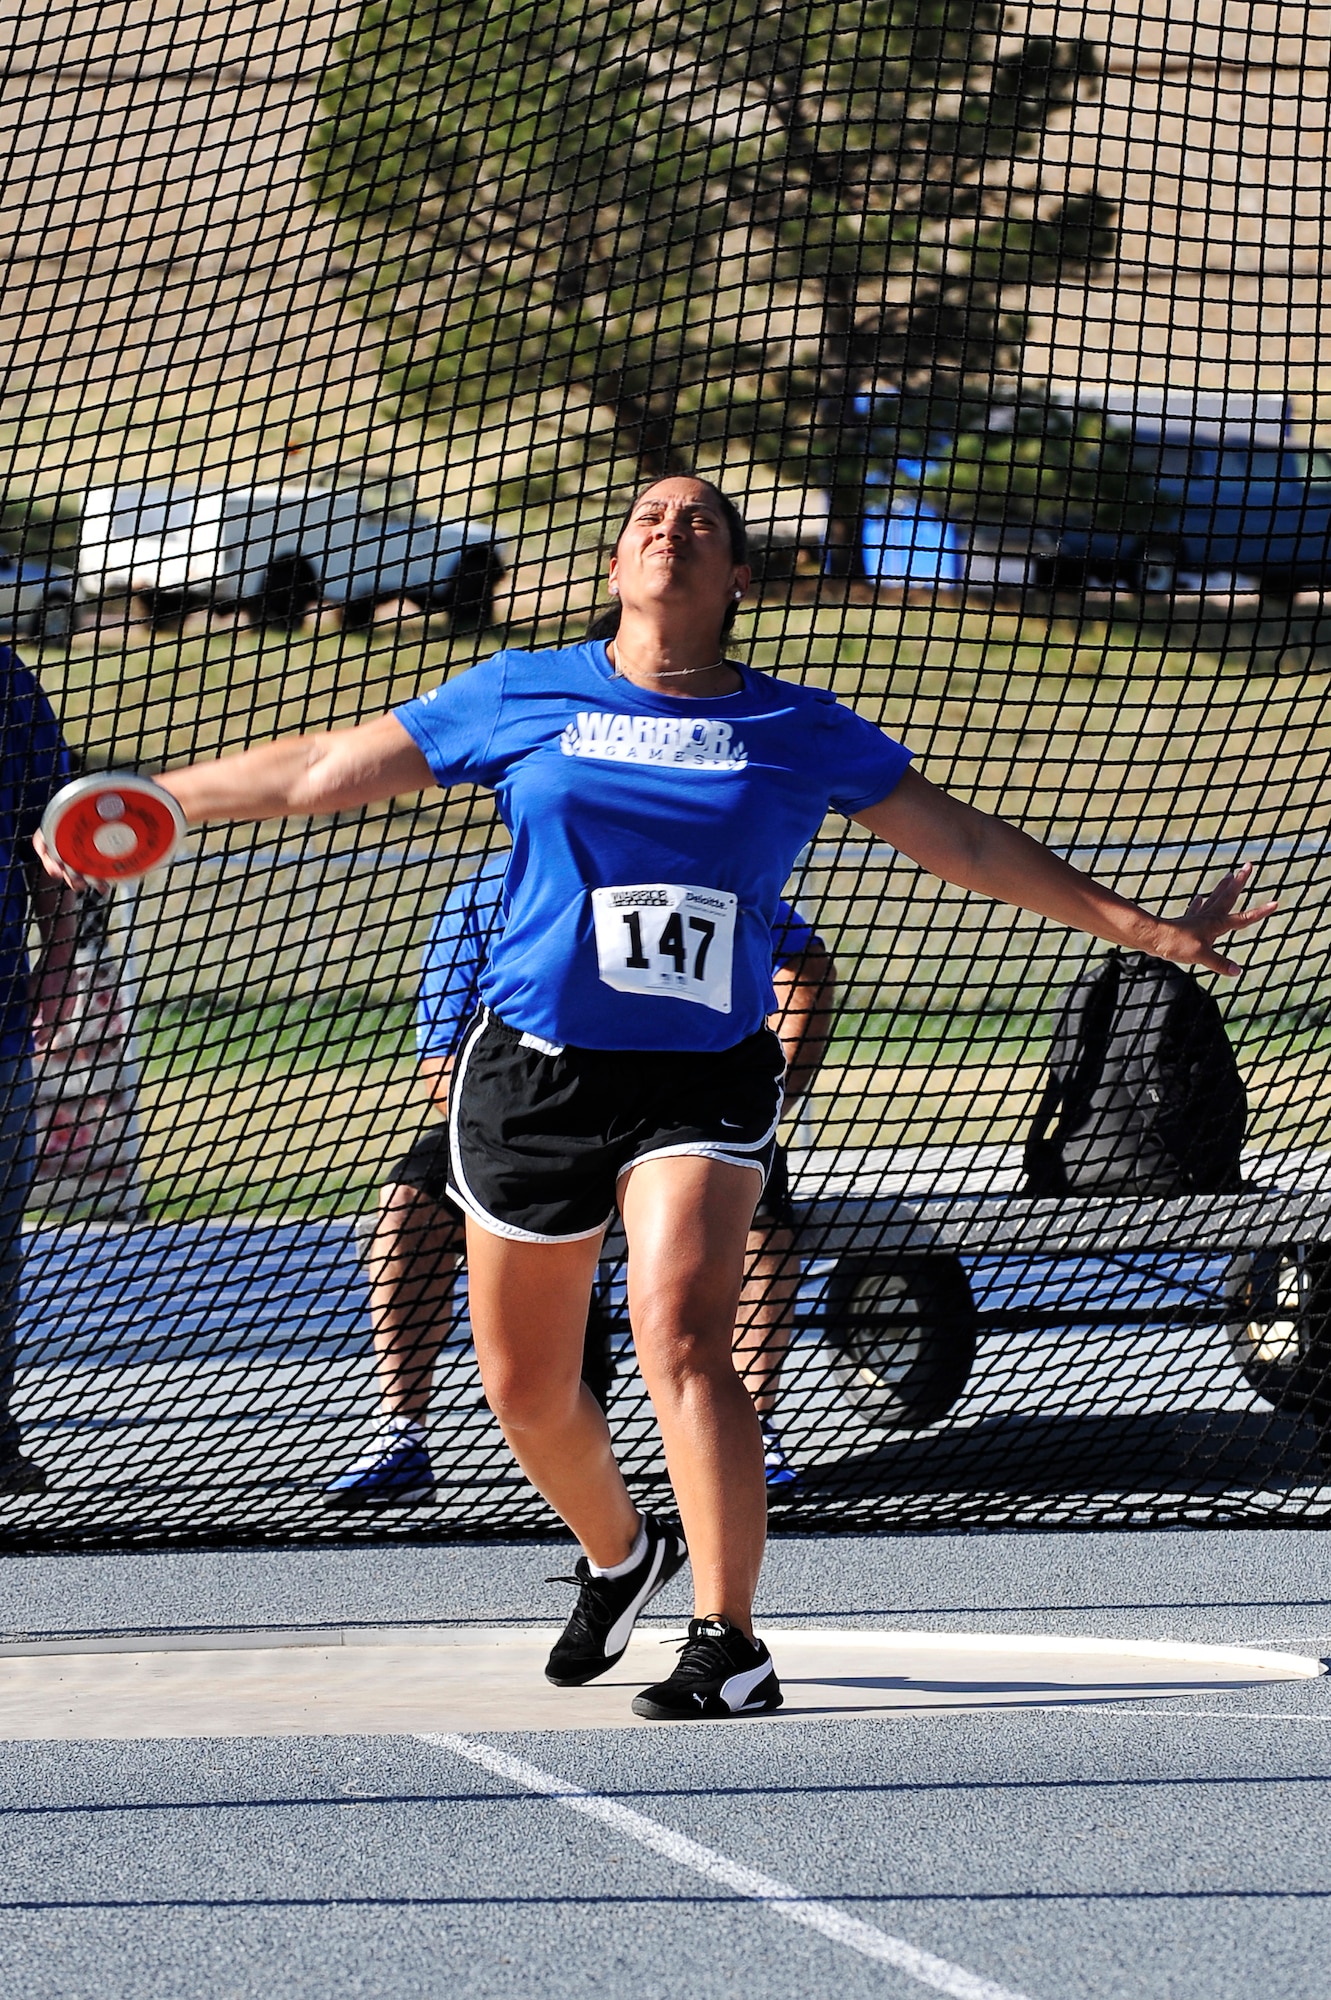 Tech Sergeant Monica Figueroa throws a discus during the 2013 Warrior Games at the U.S. Air Force Academy May 14, Colorado Springs, Colo. The Warrior Games enable service members and veterans who are injured or ill to compete in a variety of Paralympic sports. Figueroa is breast cancer survivor. (U.S. Air Force photo by Staff Sgt. Christopher Boitz/Released)